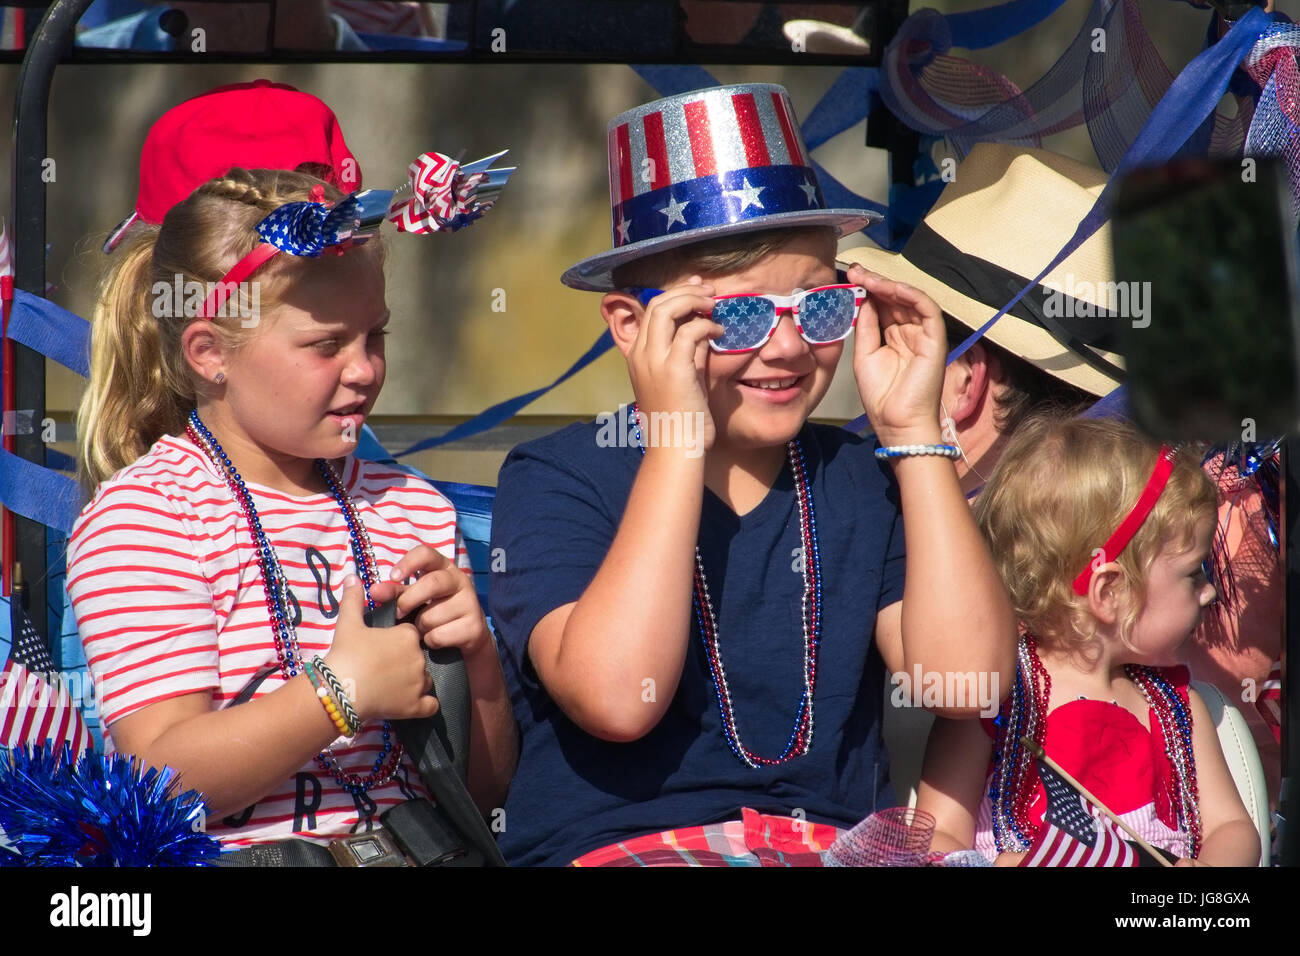 Sullivan's Island, South Carolina, USA. 4th July, 2017. A group of young children dressed in patriotic colors during the annual Sullivan's Island Independence Day parade July 4, 2017 in Sullivan's Island, South Carolina. The tiny affluent sea island hosts a bicycle and golf cart parade through the historic village. Credit: Planetpix/Alamy Live News Stock Photo